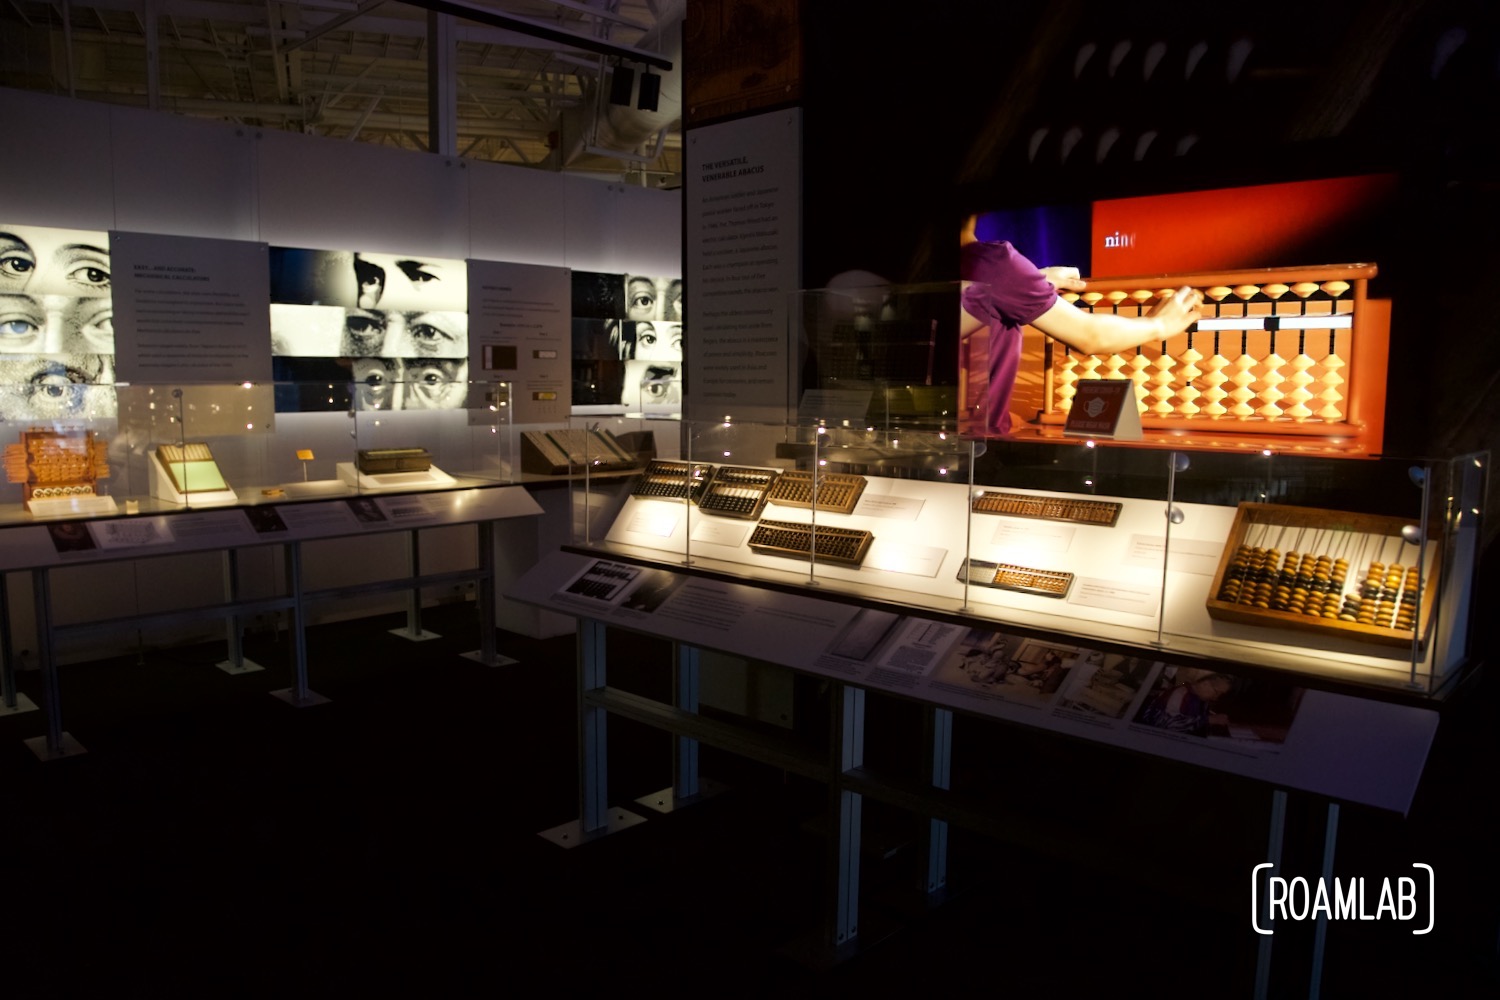 Gallery of historic abacus and other computing tools on display.